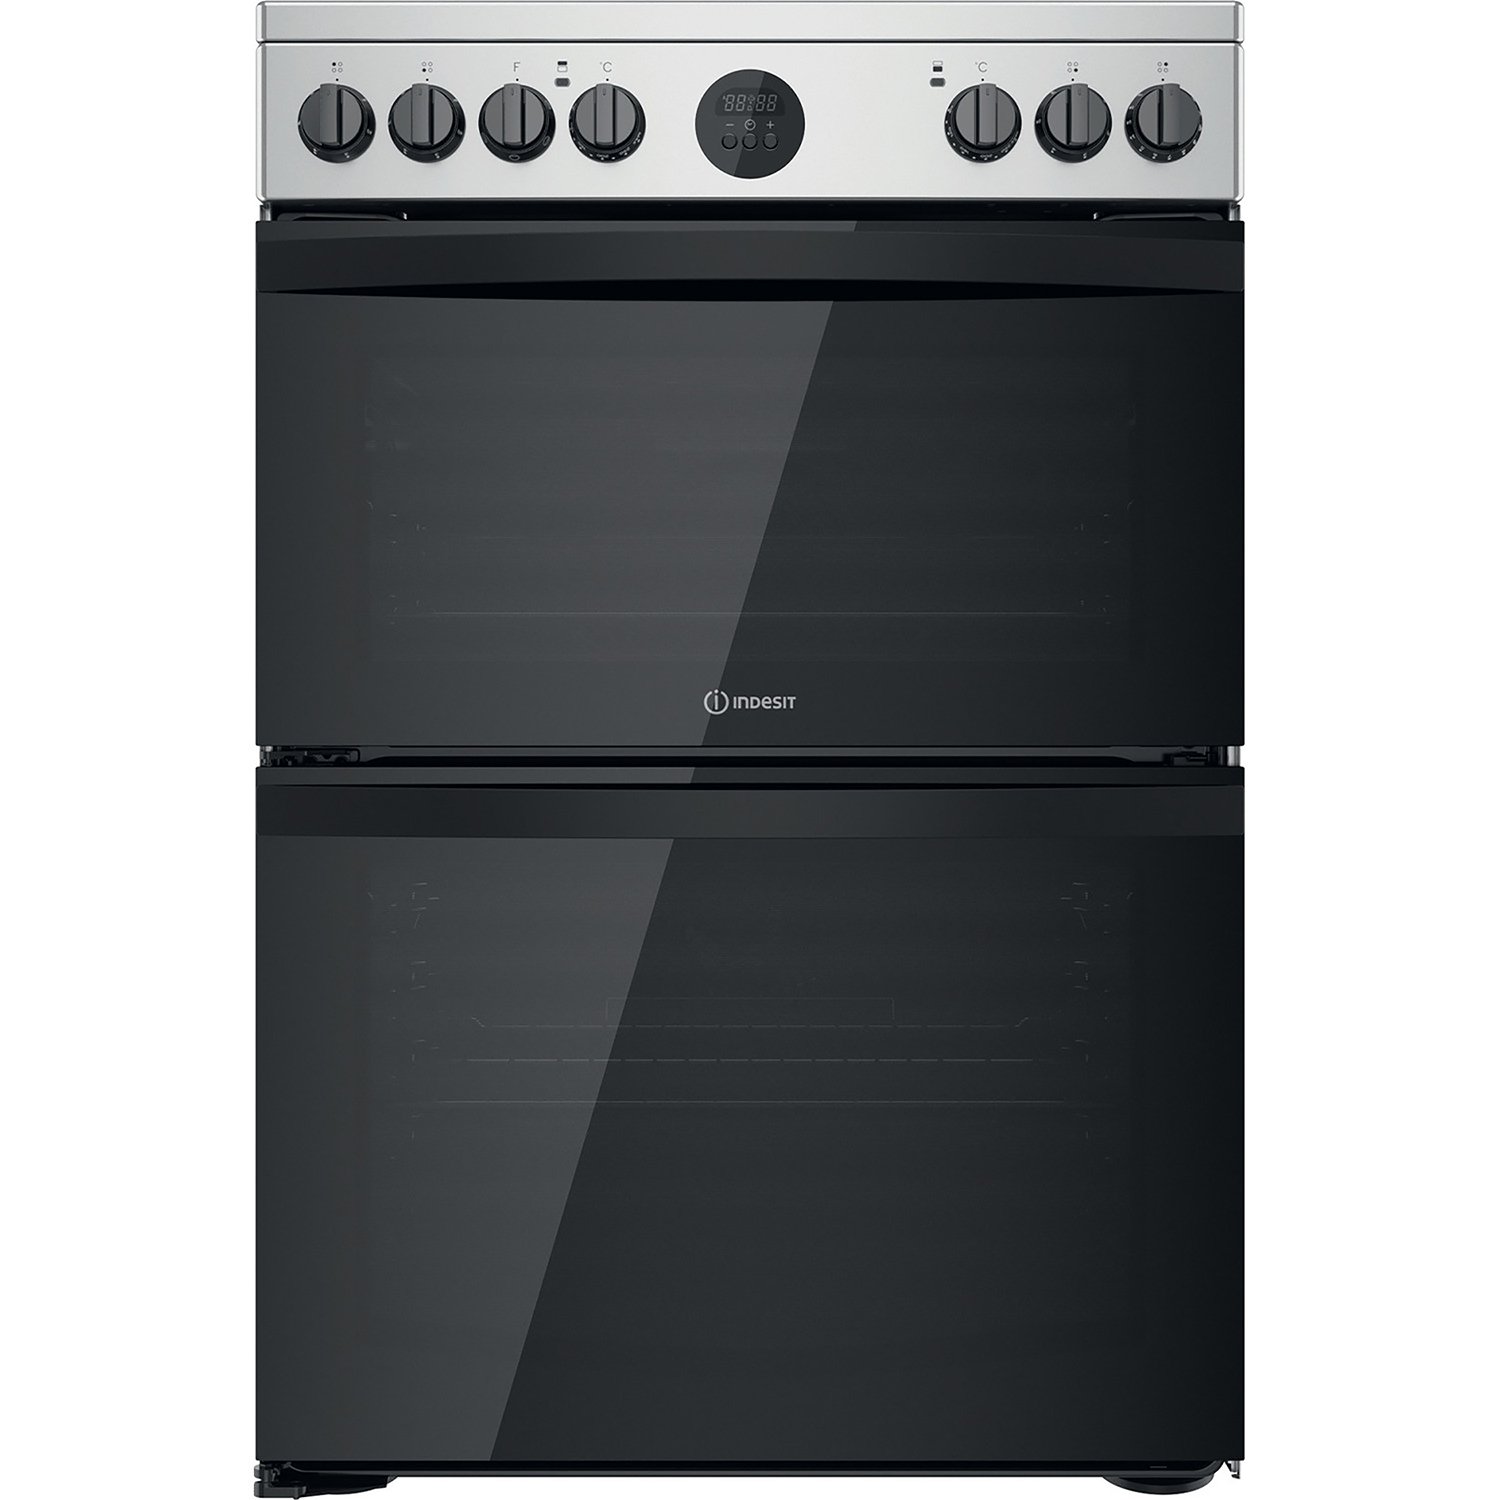 Indesit ID67V9HCX/UK 60cm Electric Cooker - Stainless Steel